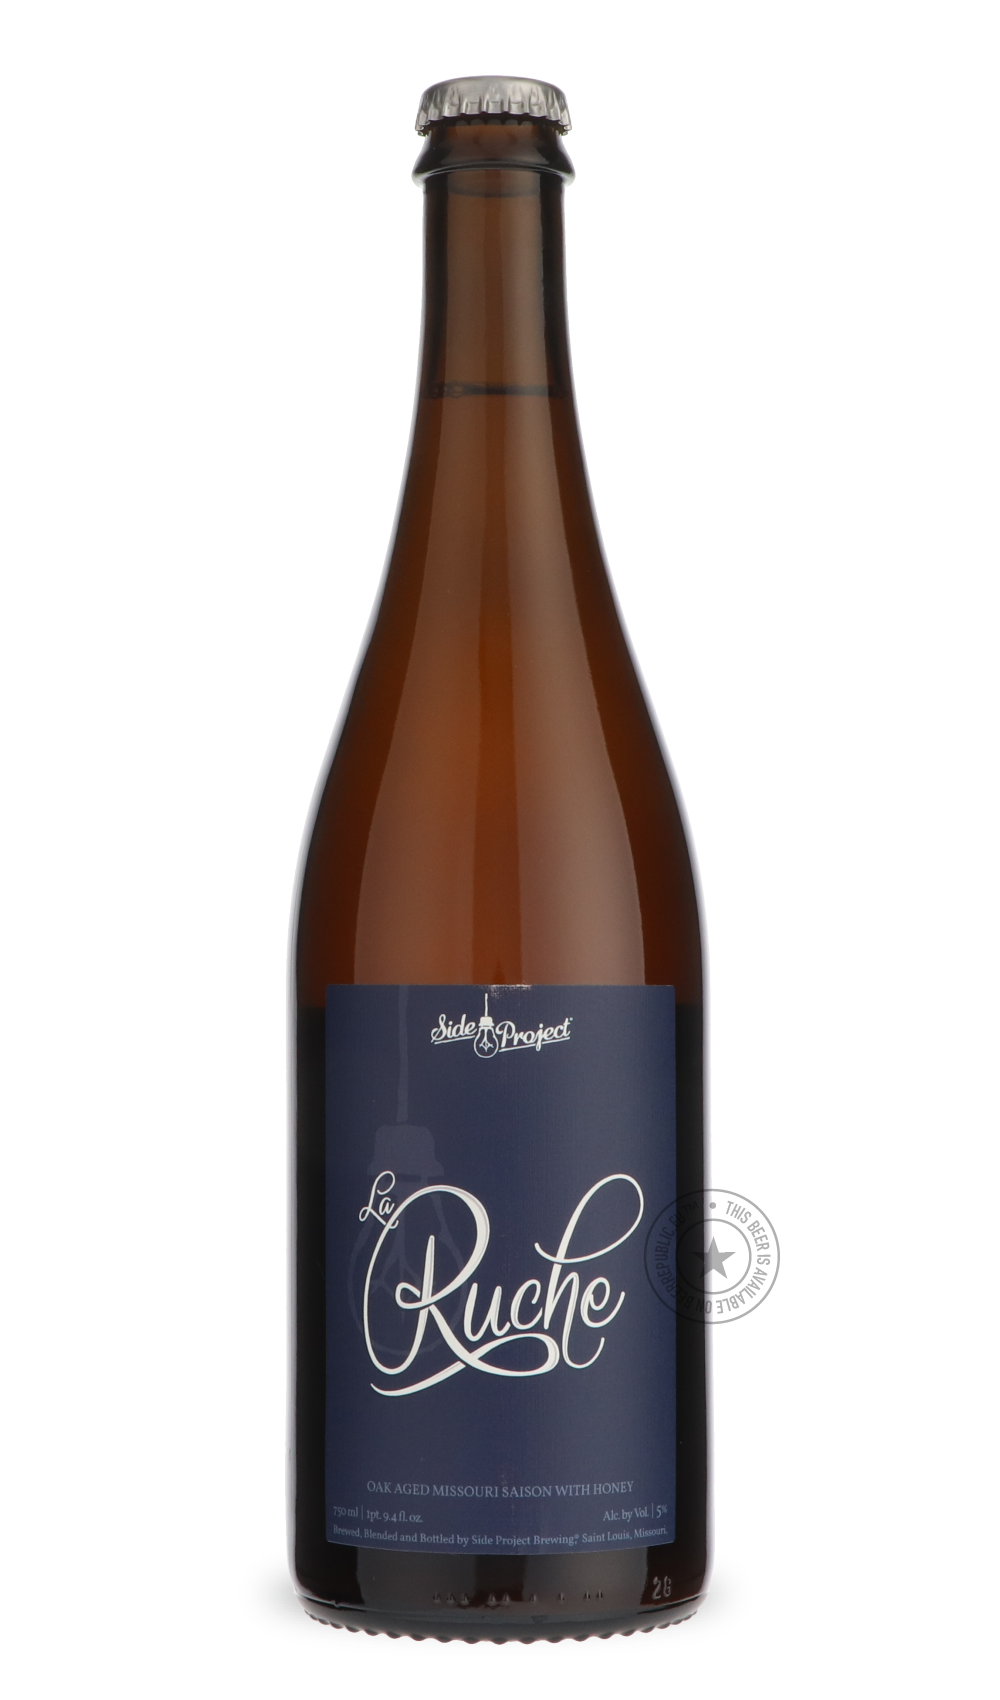 -Side Project- La Ruche - 10 Year-Sour / Wild & Fruity- Only @ Beer Republic - The best online beer store for American & Canadian craft beer - Buy beer online from the USA and Canada - Bier online kopen - Amerikaans bier kopen - Craft beer store - Craft beer kopen - Amerikanisch bier kaufen - Bier online kaufen - Acheter biere online - IPA - Stout - Porter - New England IPA - Hazy IPA - Imperial Stout - Barrel Aged - Barrel Aged Imperial Stout - Brown - Dark beer - Blond - Blonde - Pilsner - Lager - Wheat -